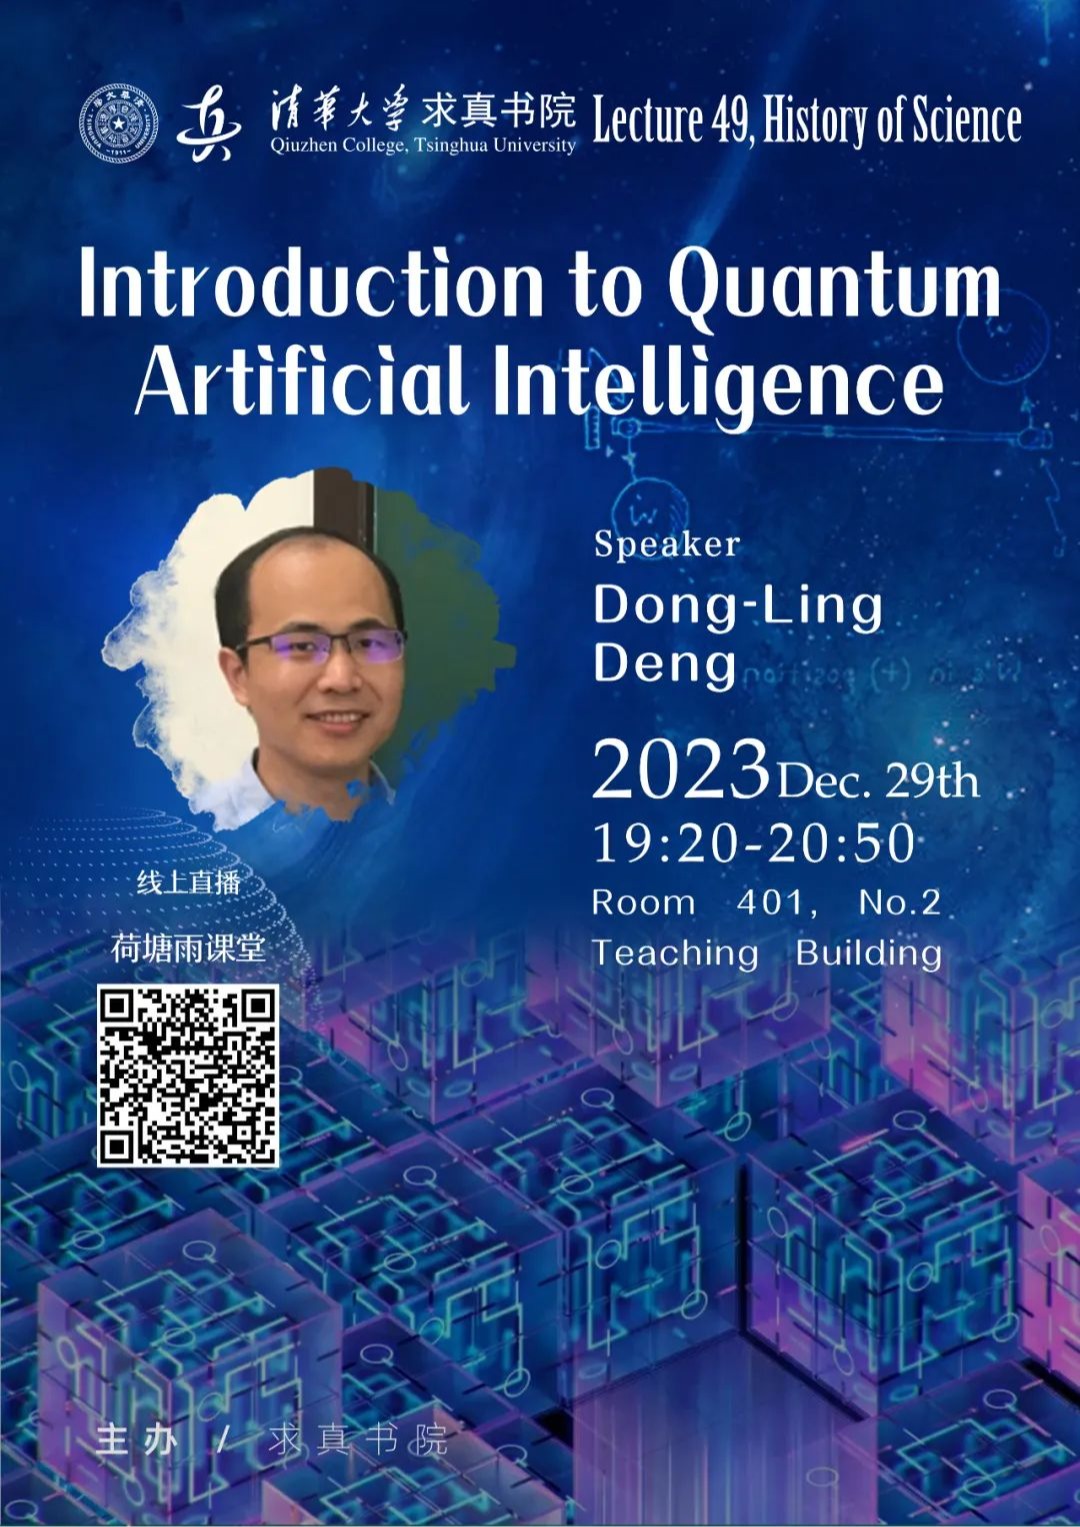 Lectures on History of Science – Lecture 45:：Introduction to Quantum Artificial Intelligence